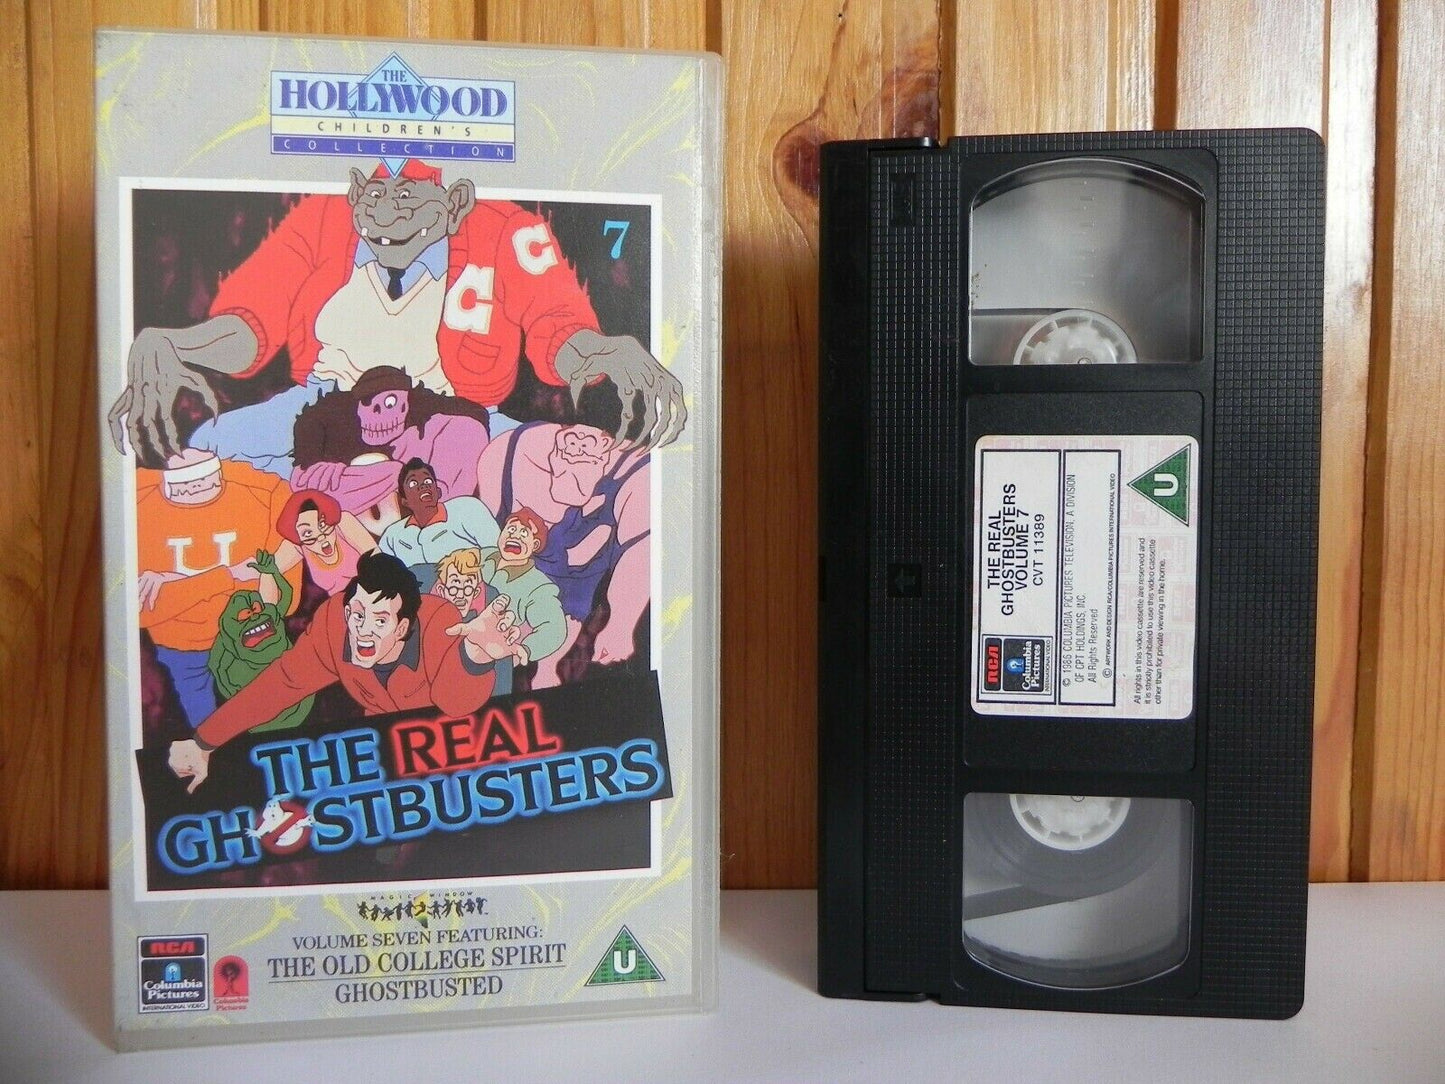 The Real Ghostbusters - Volume 7 - The Old College Spirit - Ghostbusted - VHS-